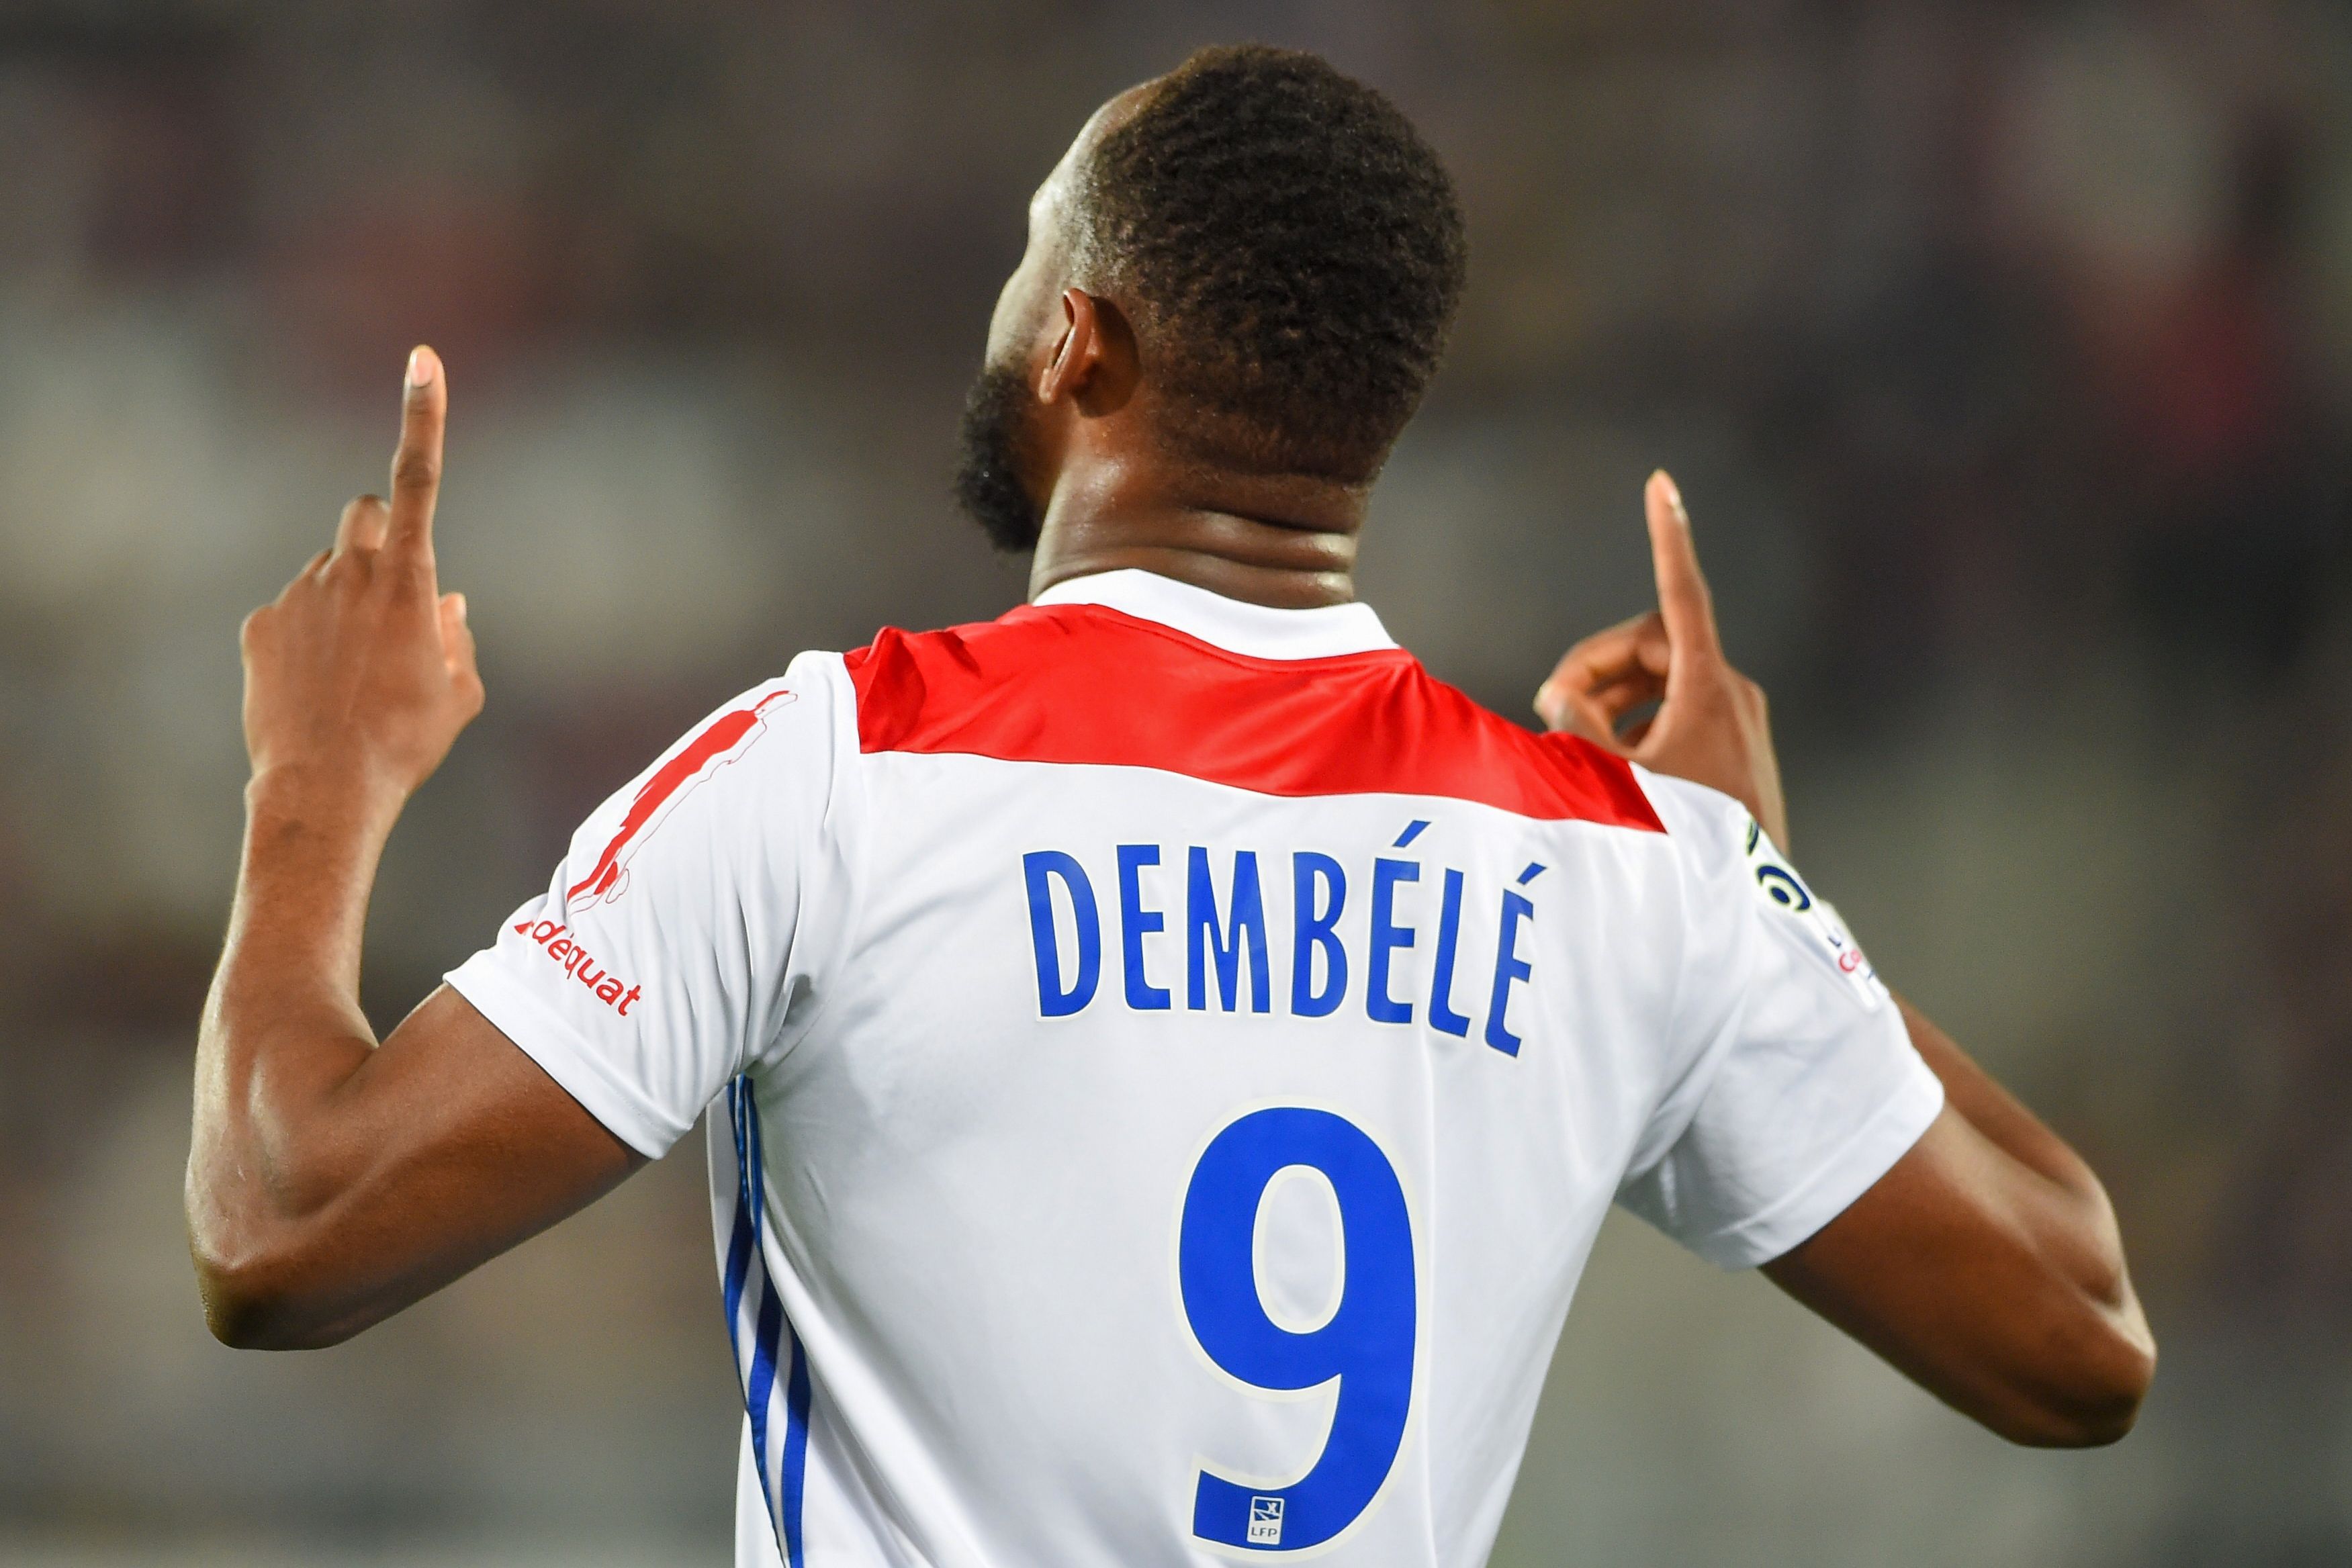 Lyon's French forward Moussa Dembele gestures after scoring a goal during the French L1 football match between Bordeaux (FCGB) and Lyon (OL) on April 26, 2019 at the Matmut Atlantique stadium in Bordeaux, southwestern France. (Photo by NICOLAS TUCAT / AFP)        (Photo credit should read NICOLAS TUCAT/AFP/Getty Images)